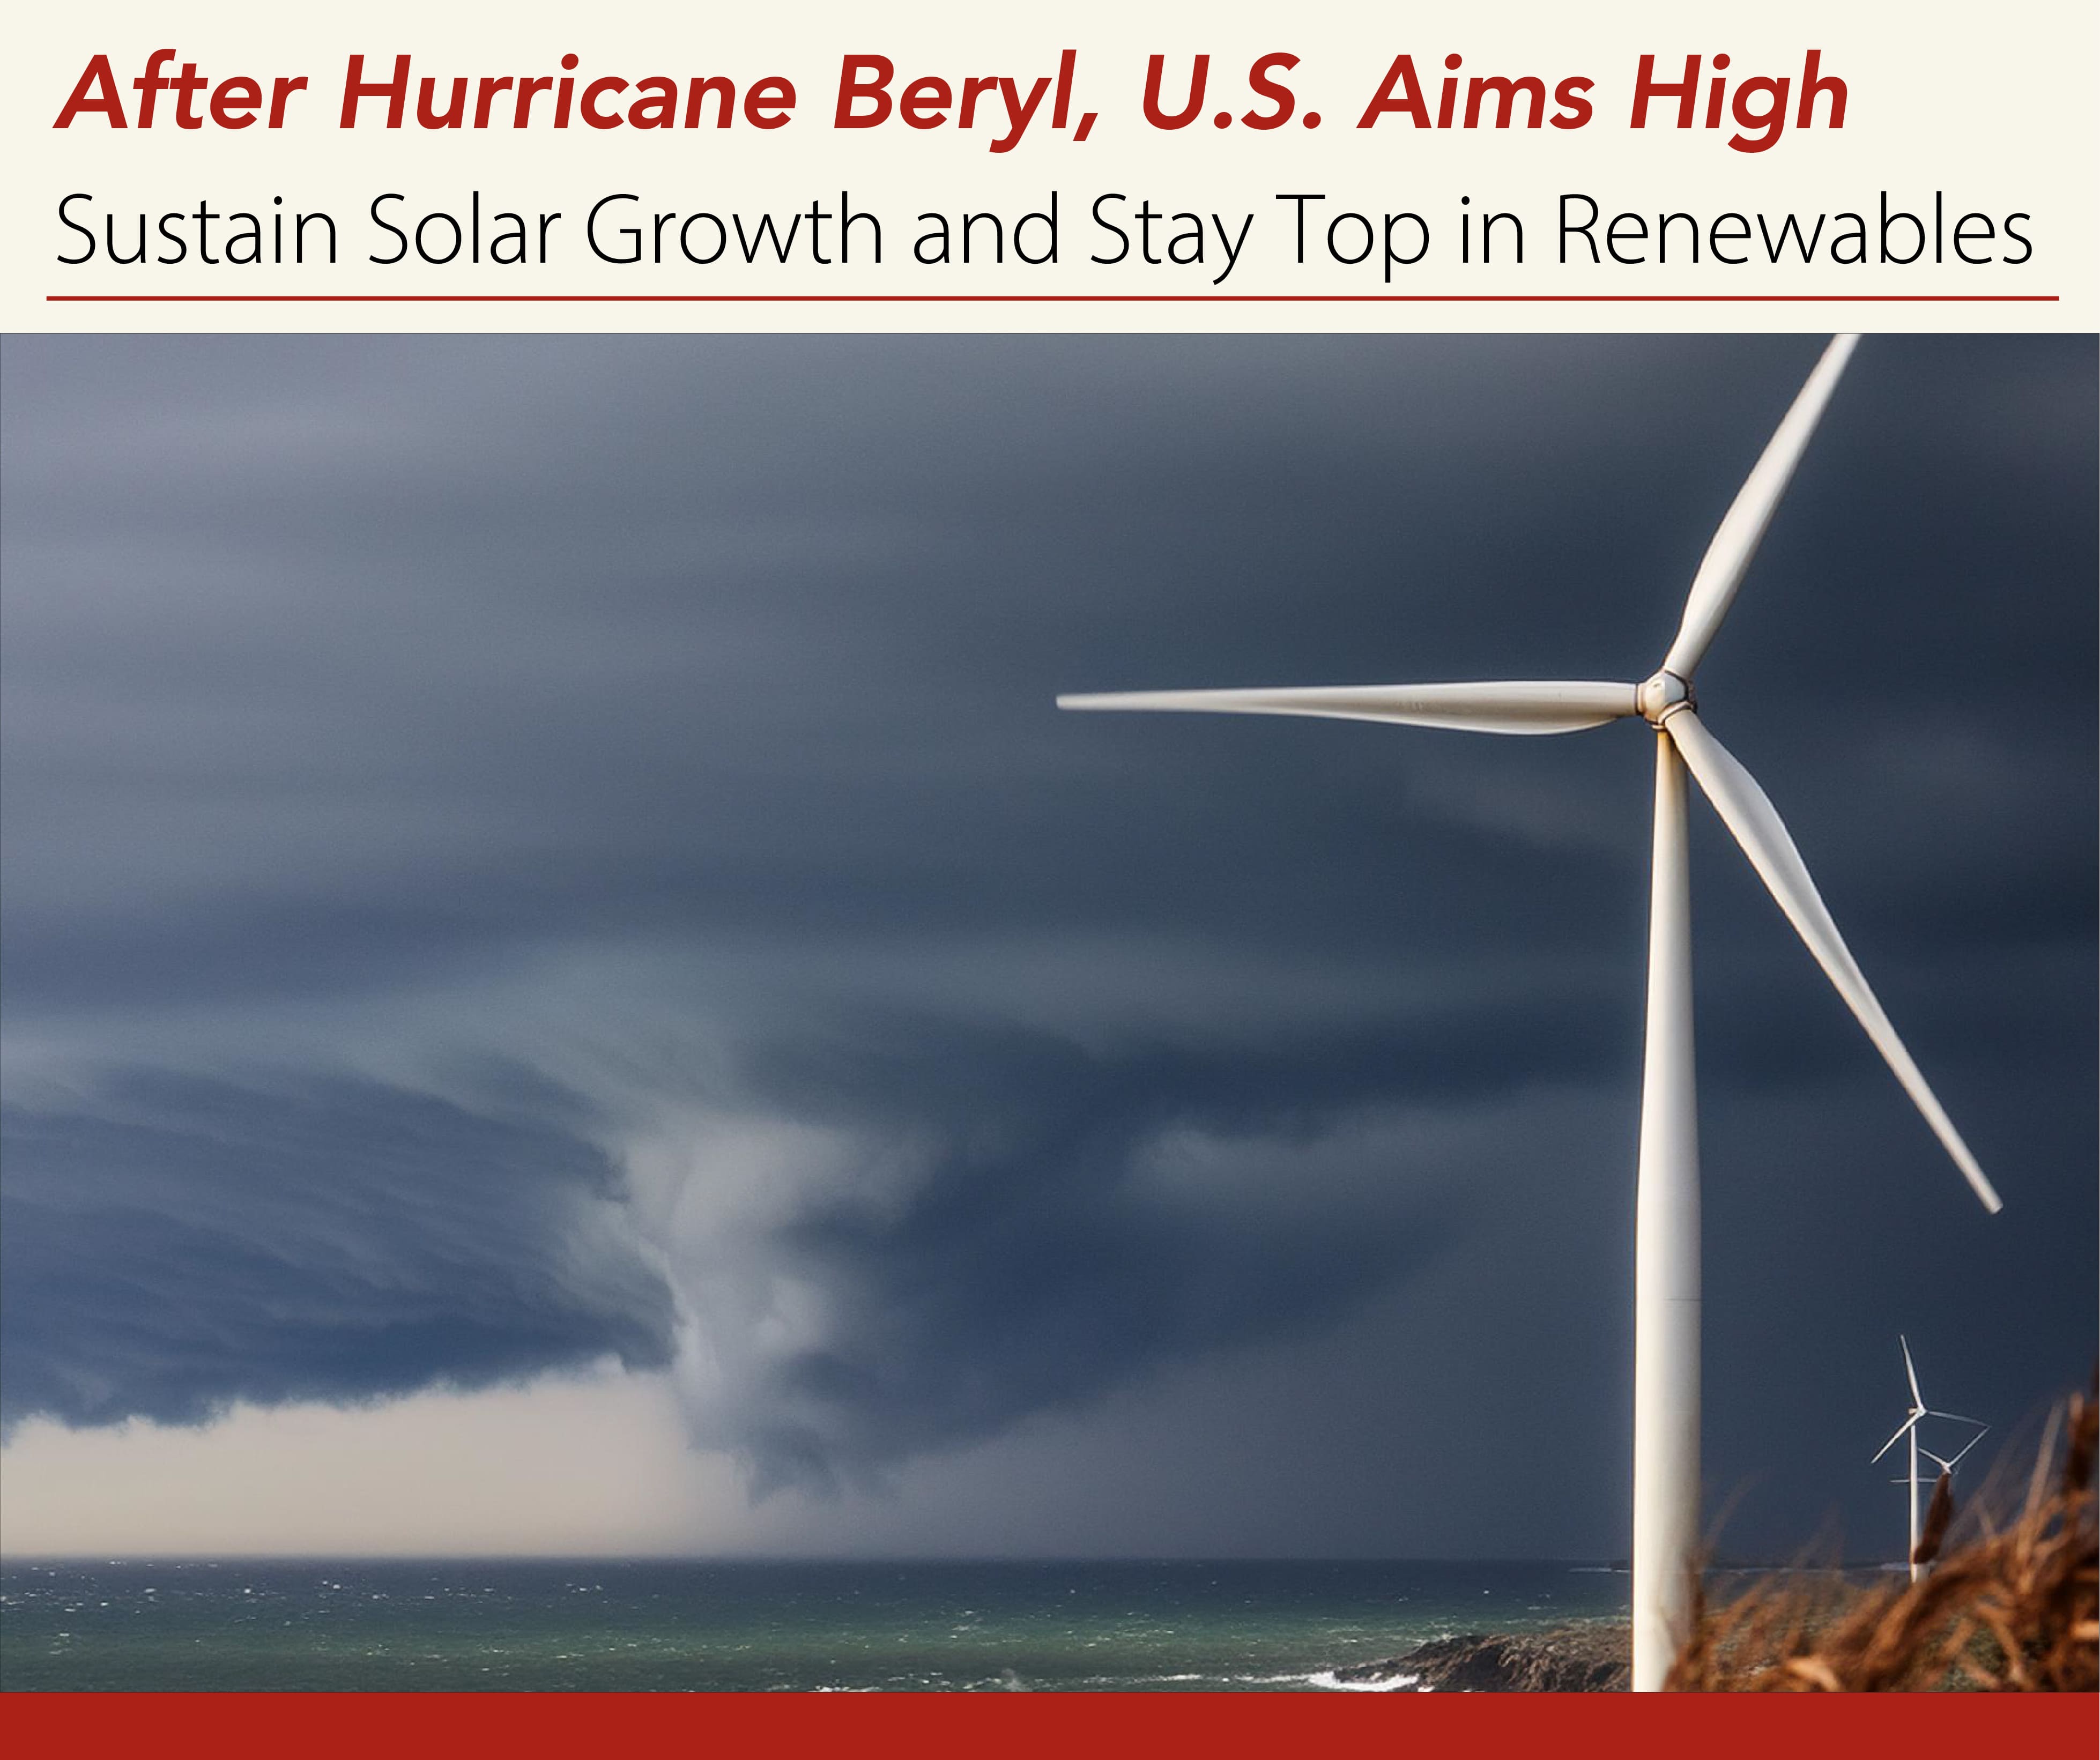 After-Hurricane-Beryl-U-S-Aims-High-to-Sustain-Solar-Energy-Growth-and-Stay-Top-in-Renewables